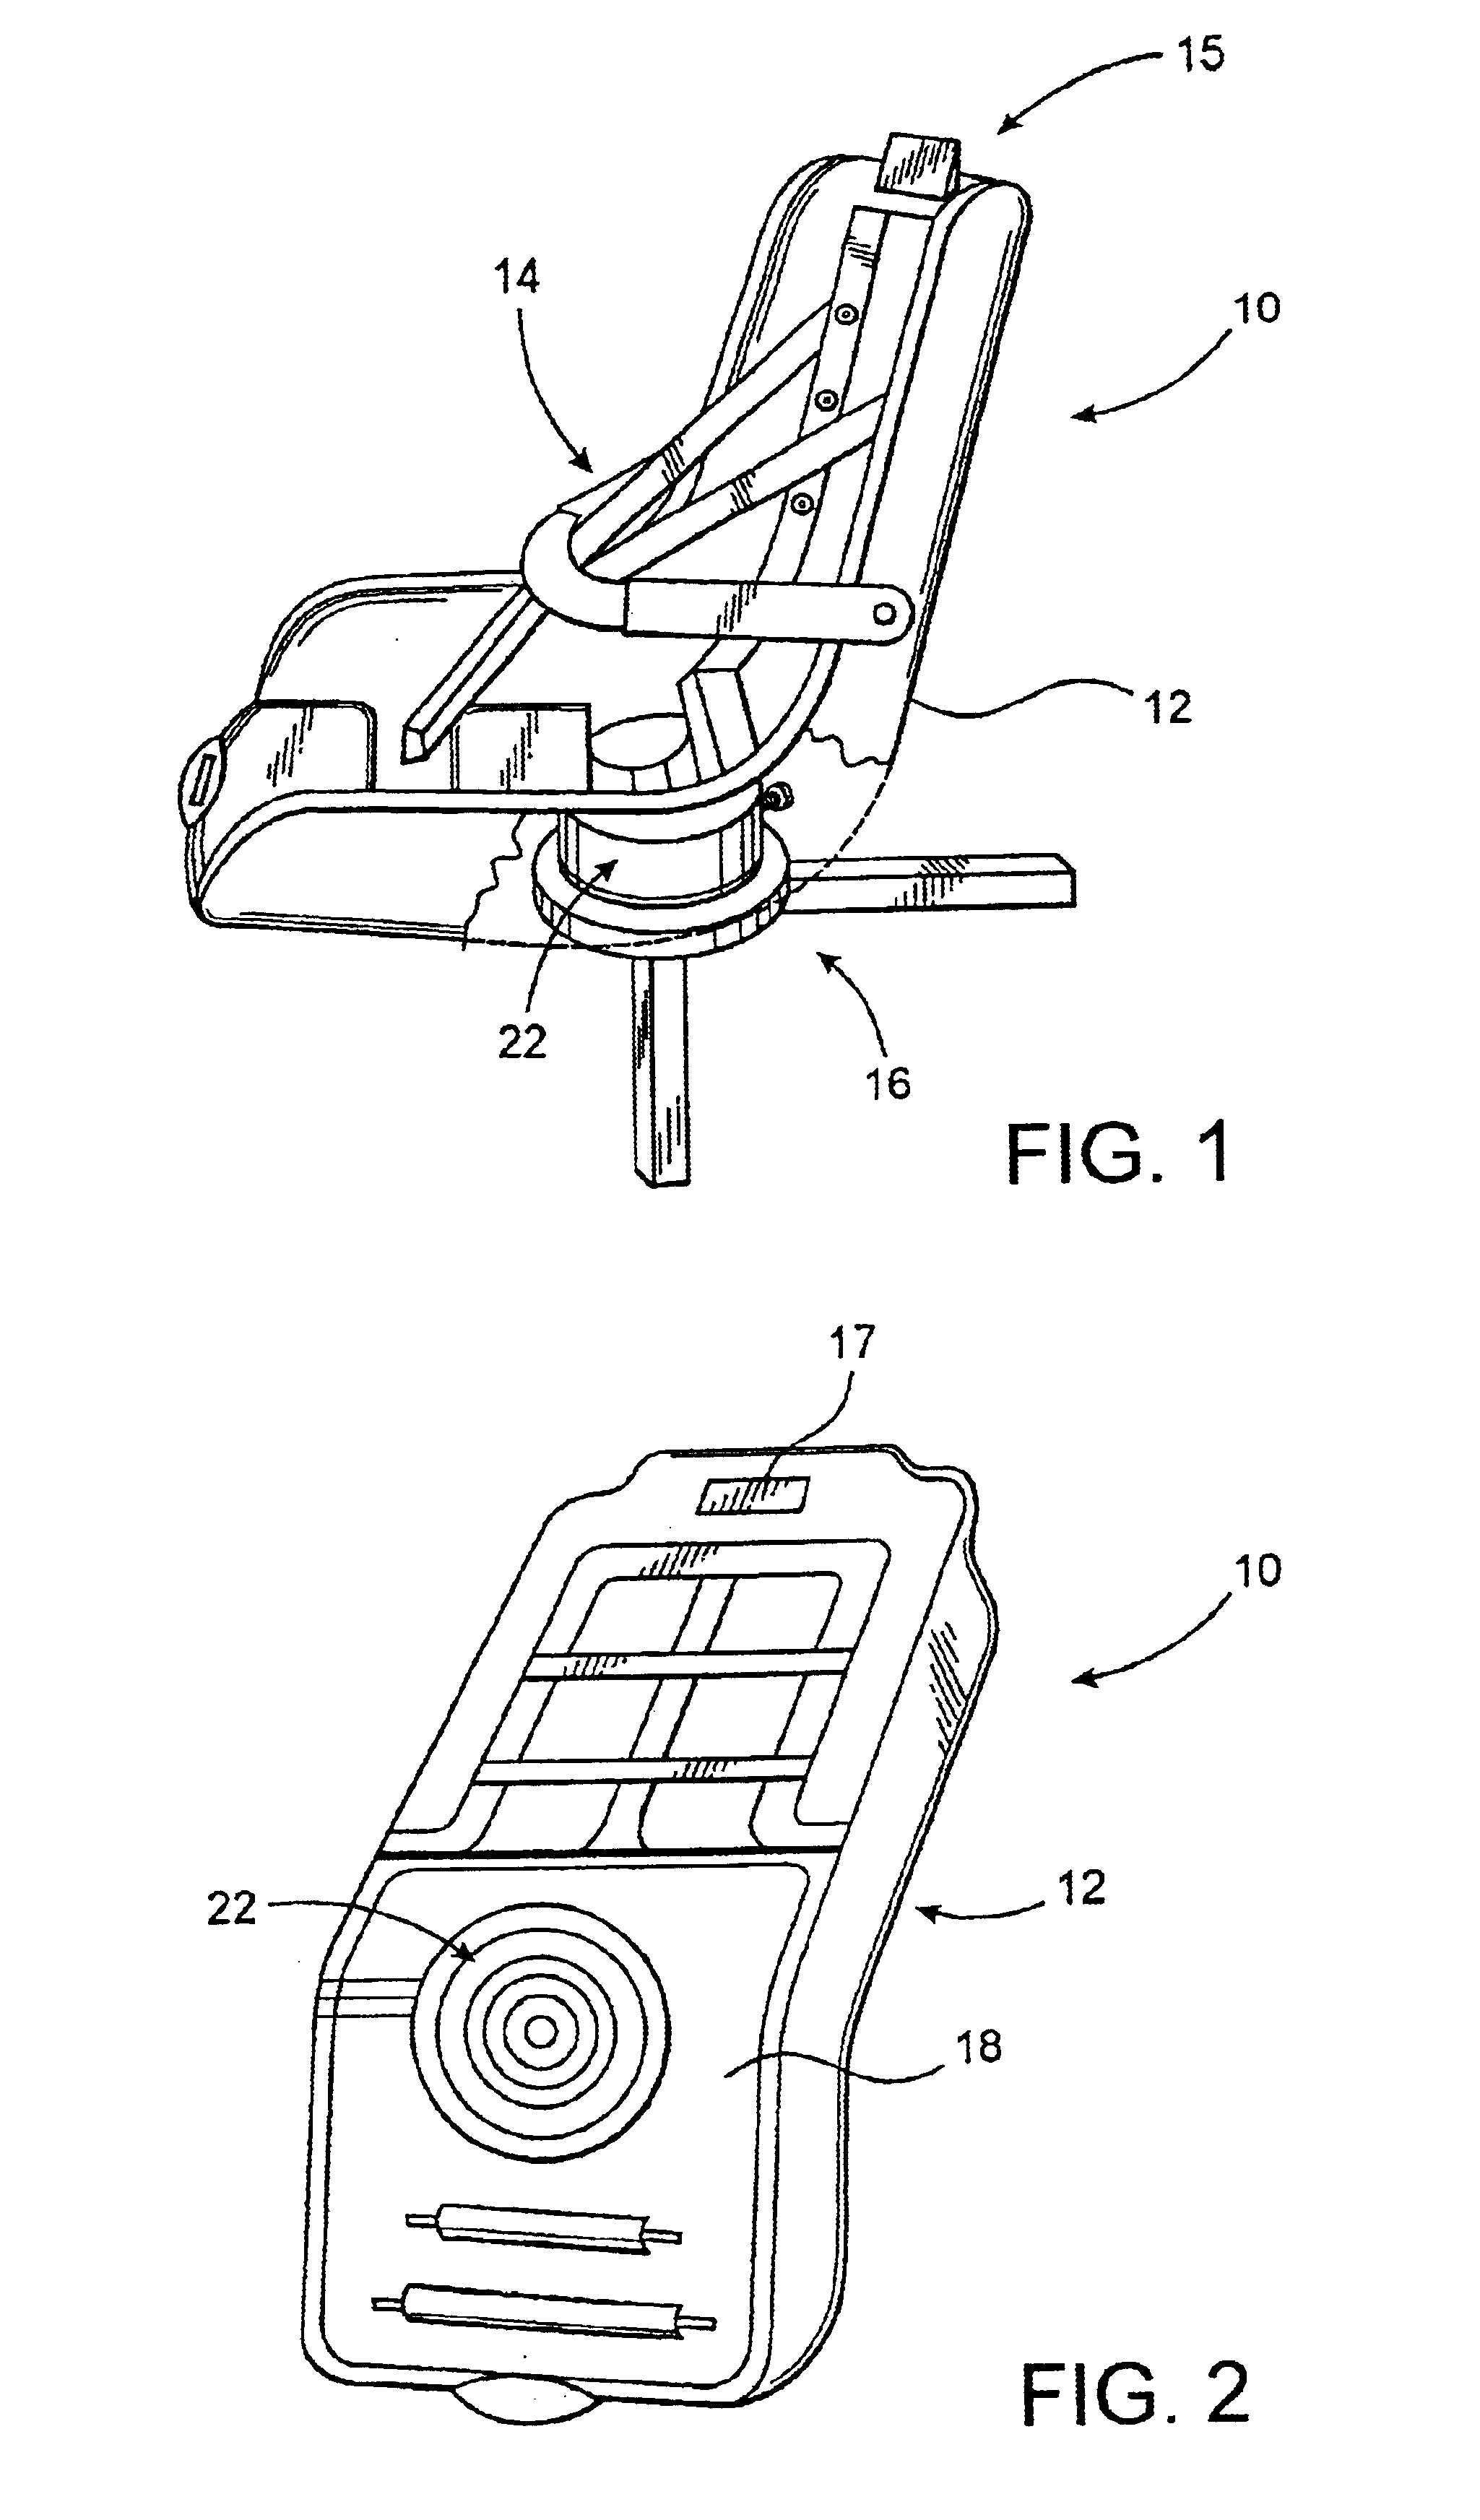 Safety seat for a marine craft or other vehicle